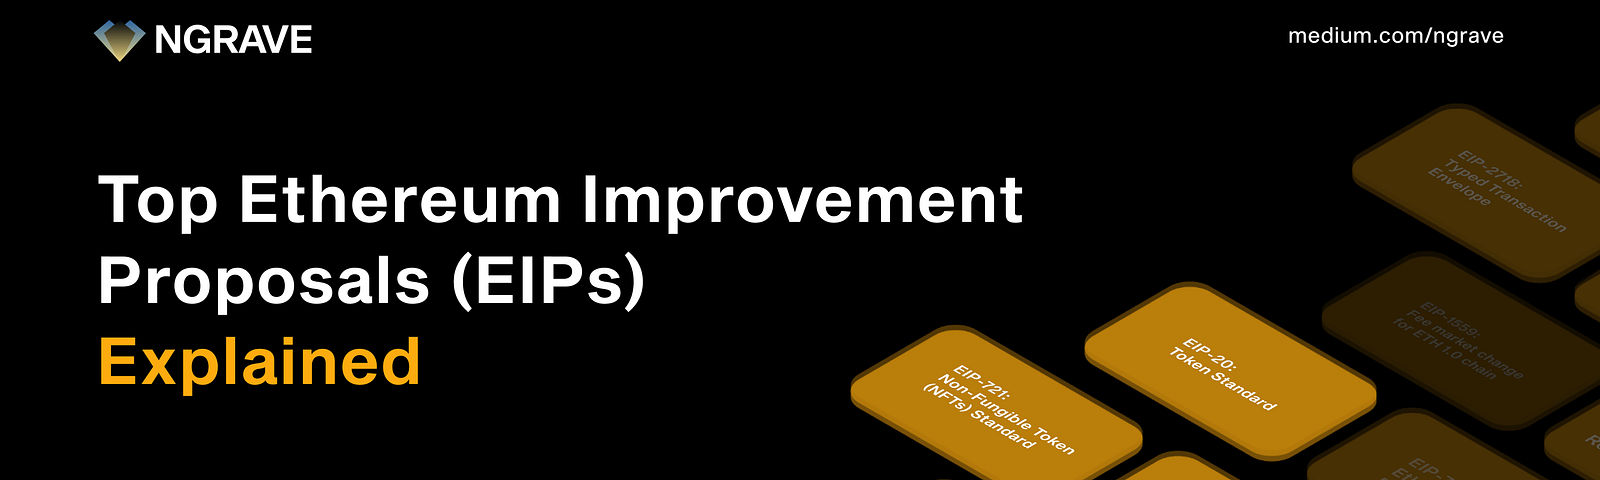 Top Ethereum improvement proposals (EIPs) explained: EIP-20 (ERC-20), EIP-721: Non-Fungible Token Standard, EIP-1559: Fee market change for ETH 1.0 chain, EIP-3675: Upgrade consensus to Proof-of-Stake.